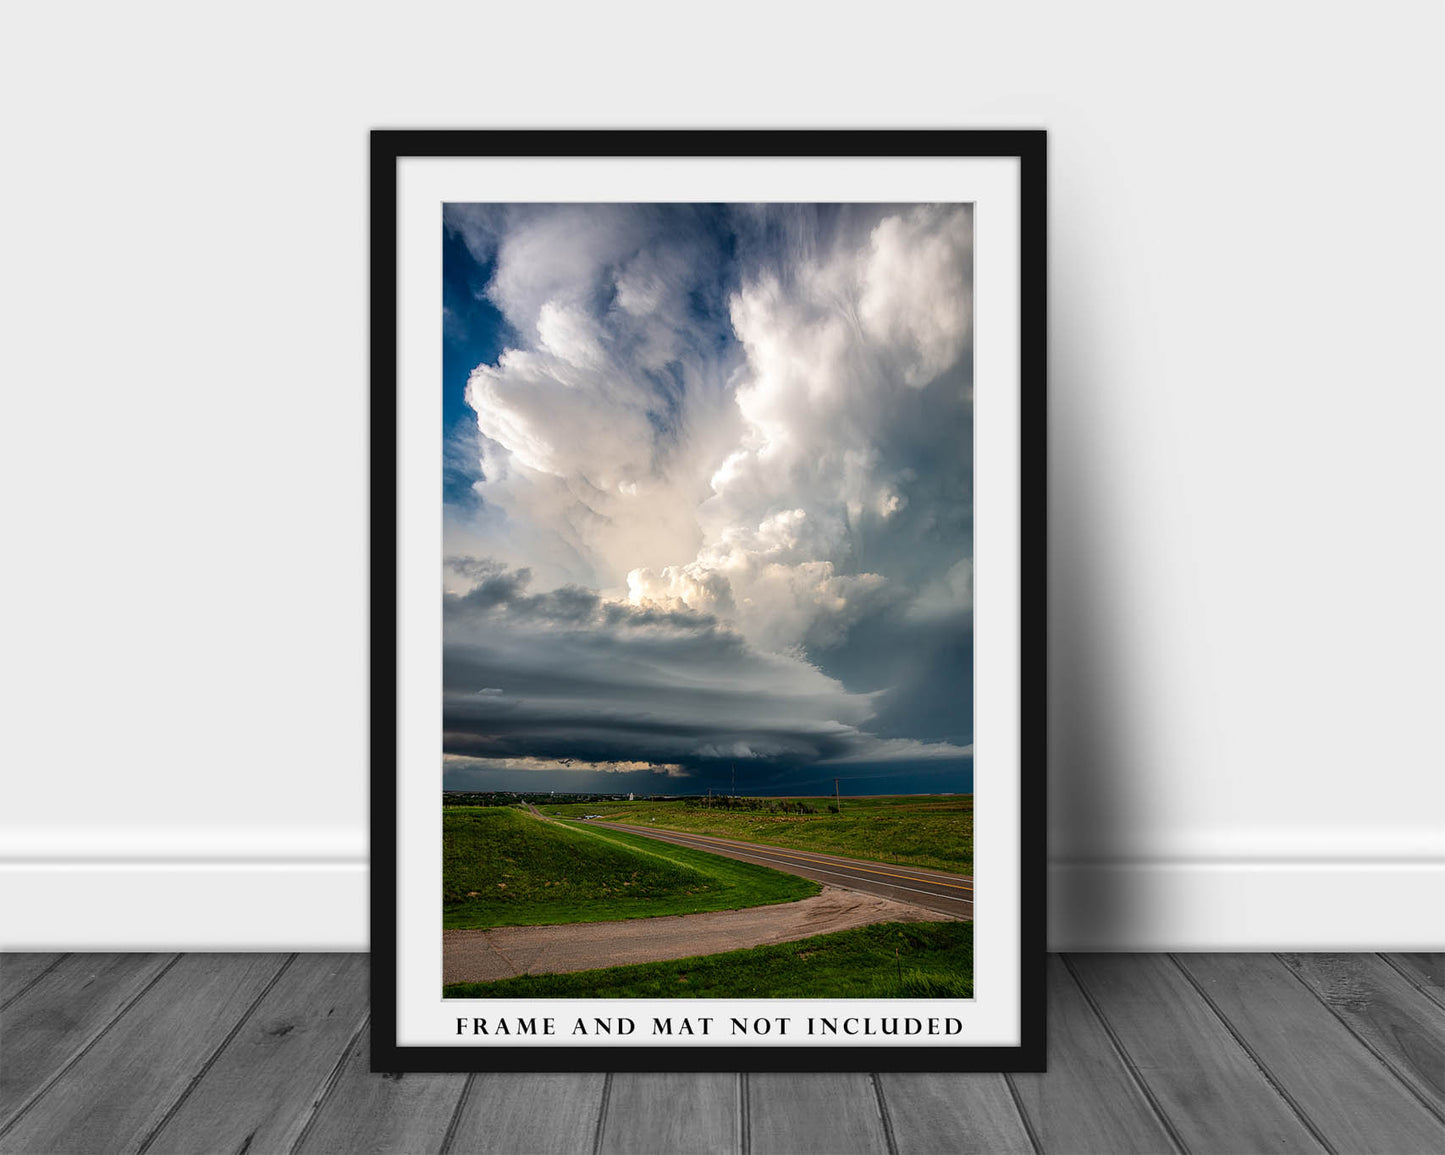 Storm Photography Print Vertical Picture of Supercell with Updraft Over Highway on Spring Day in Kansas - Nature Wall Art Decor 4x6 to 40x60